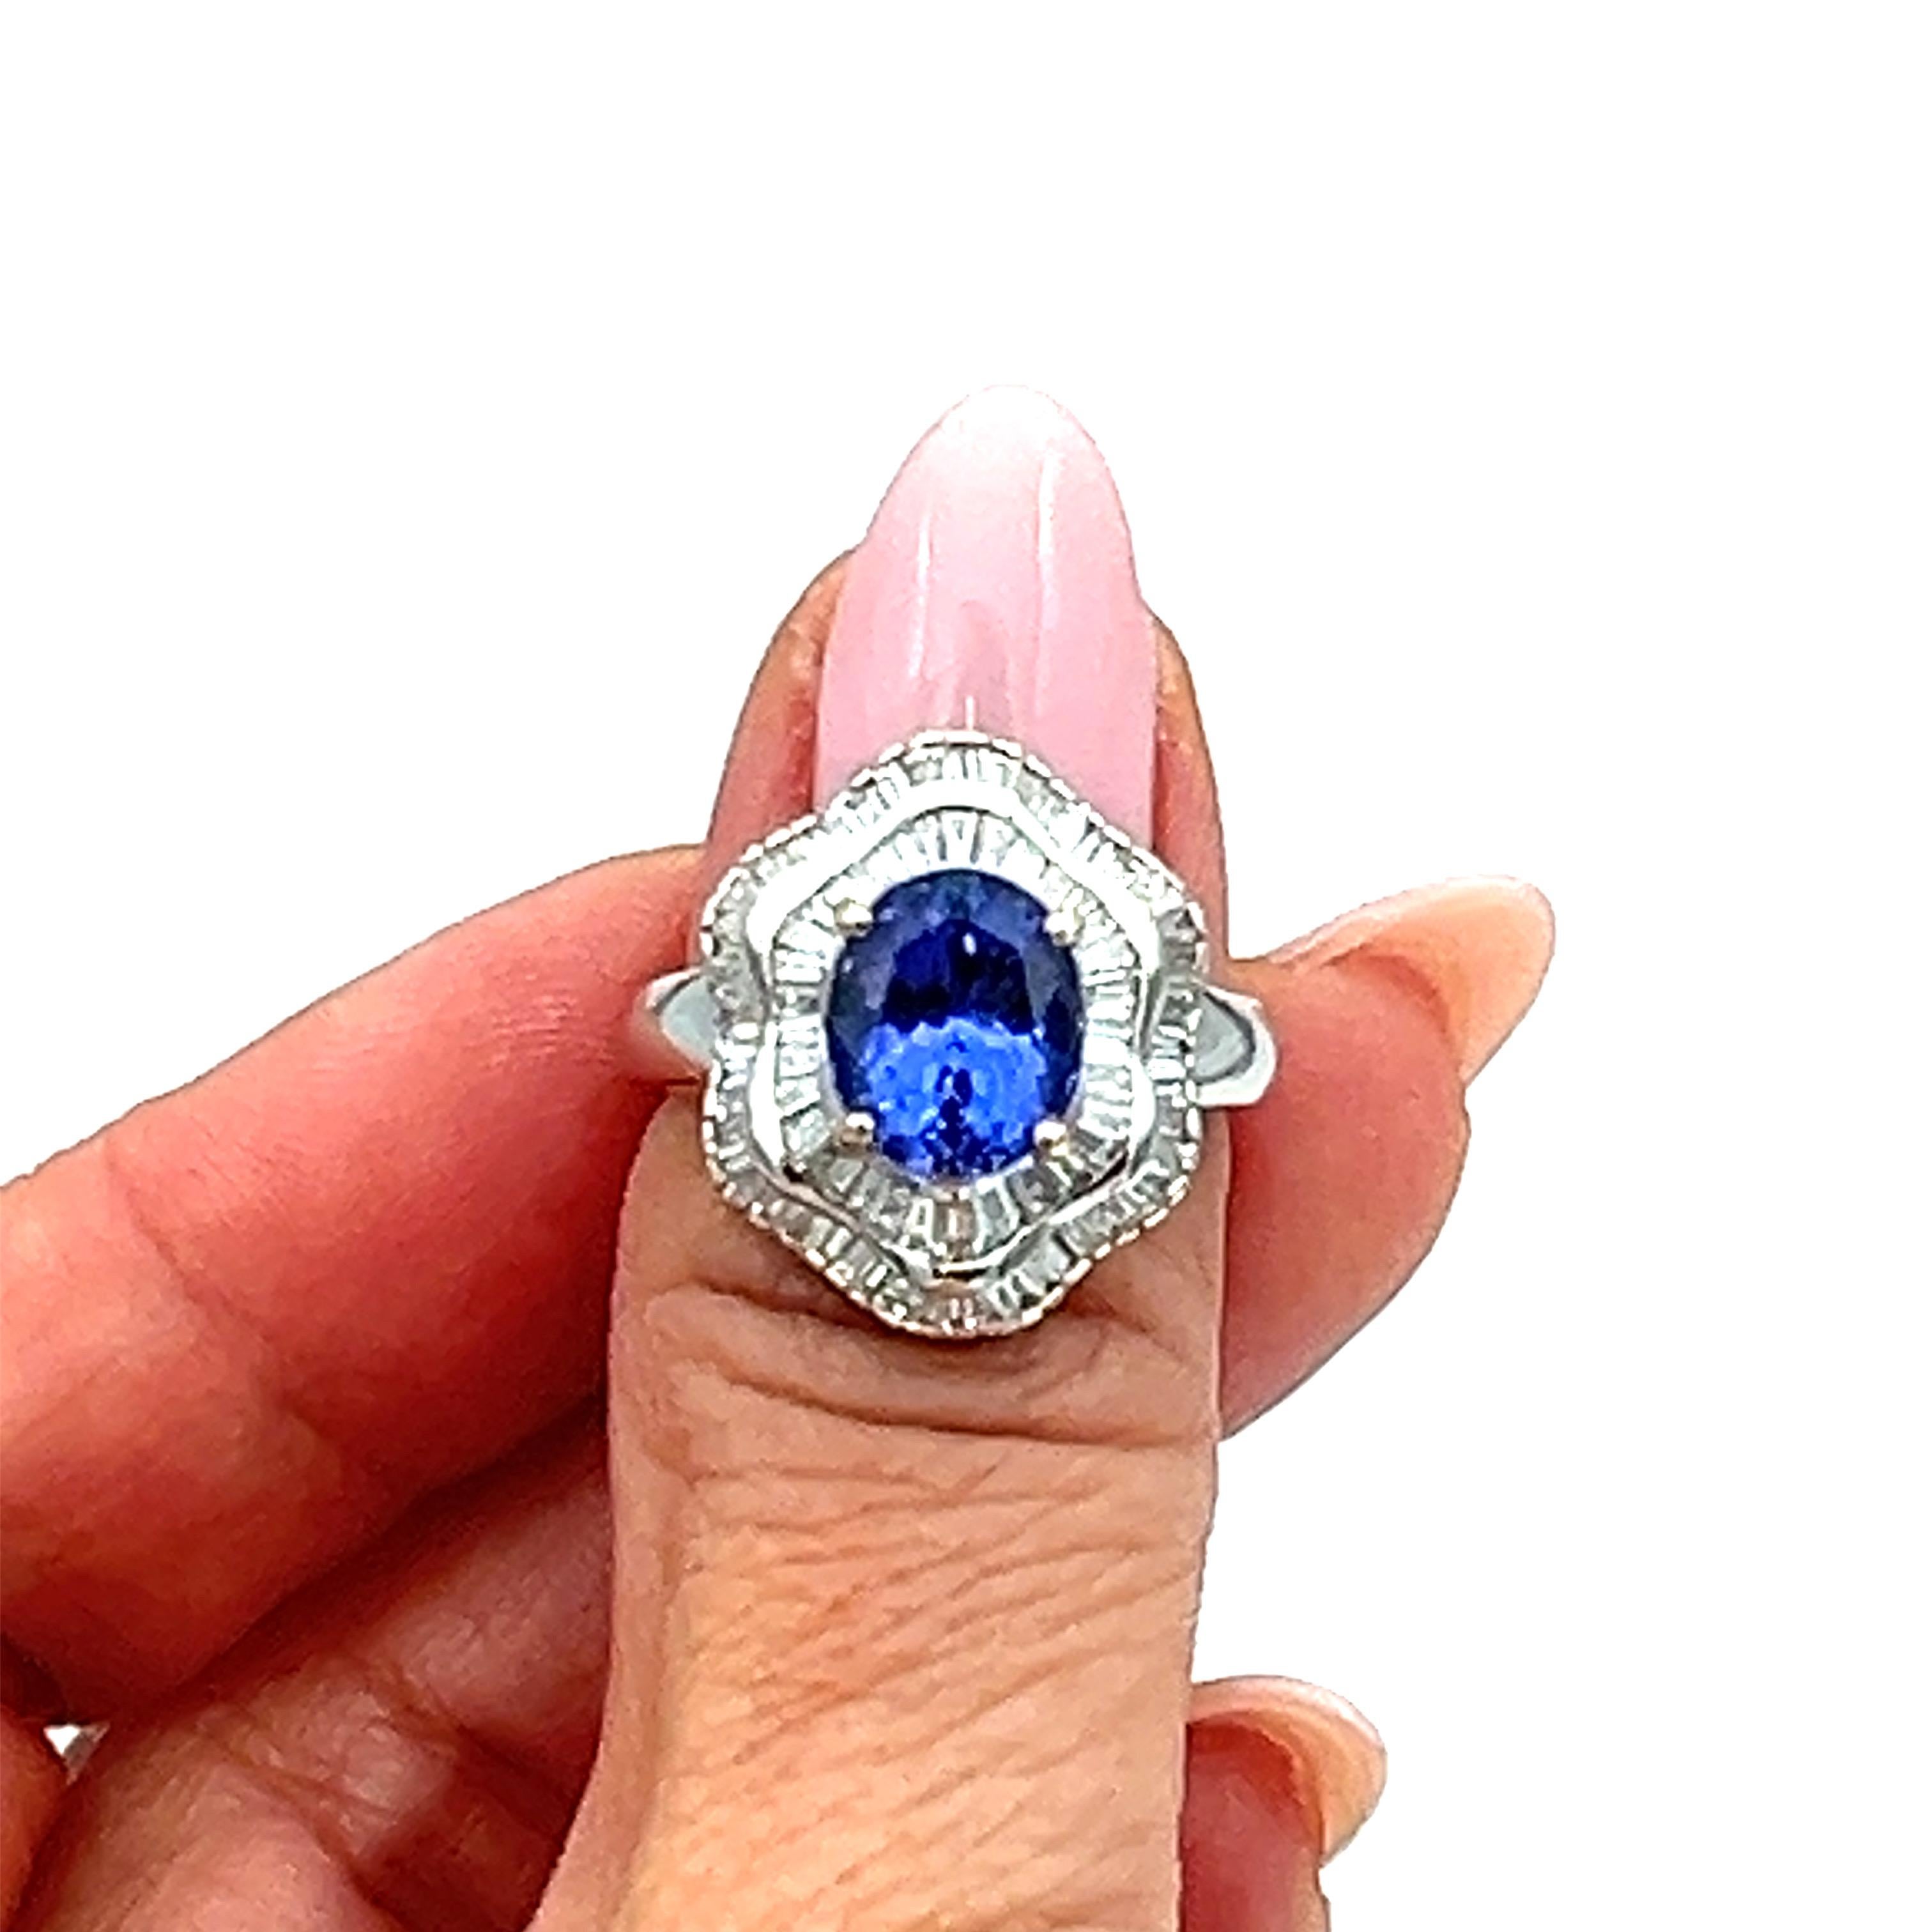 This stunning ring features a 3.11 carat oval-shaped tanzanite stone in a beautiful shade of blue, surrounded by sparkling white diamonds. The ring is made of 18k white gold and has a ring size of 7. The gemstones are set in a way that allows for